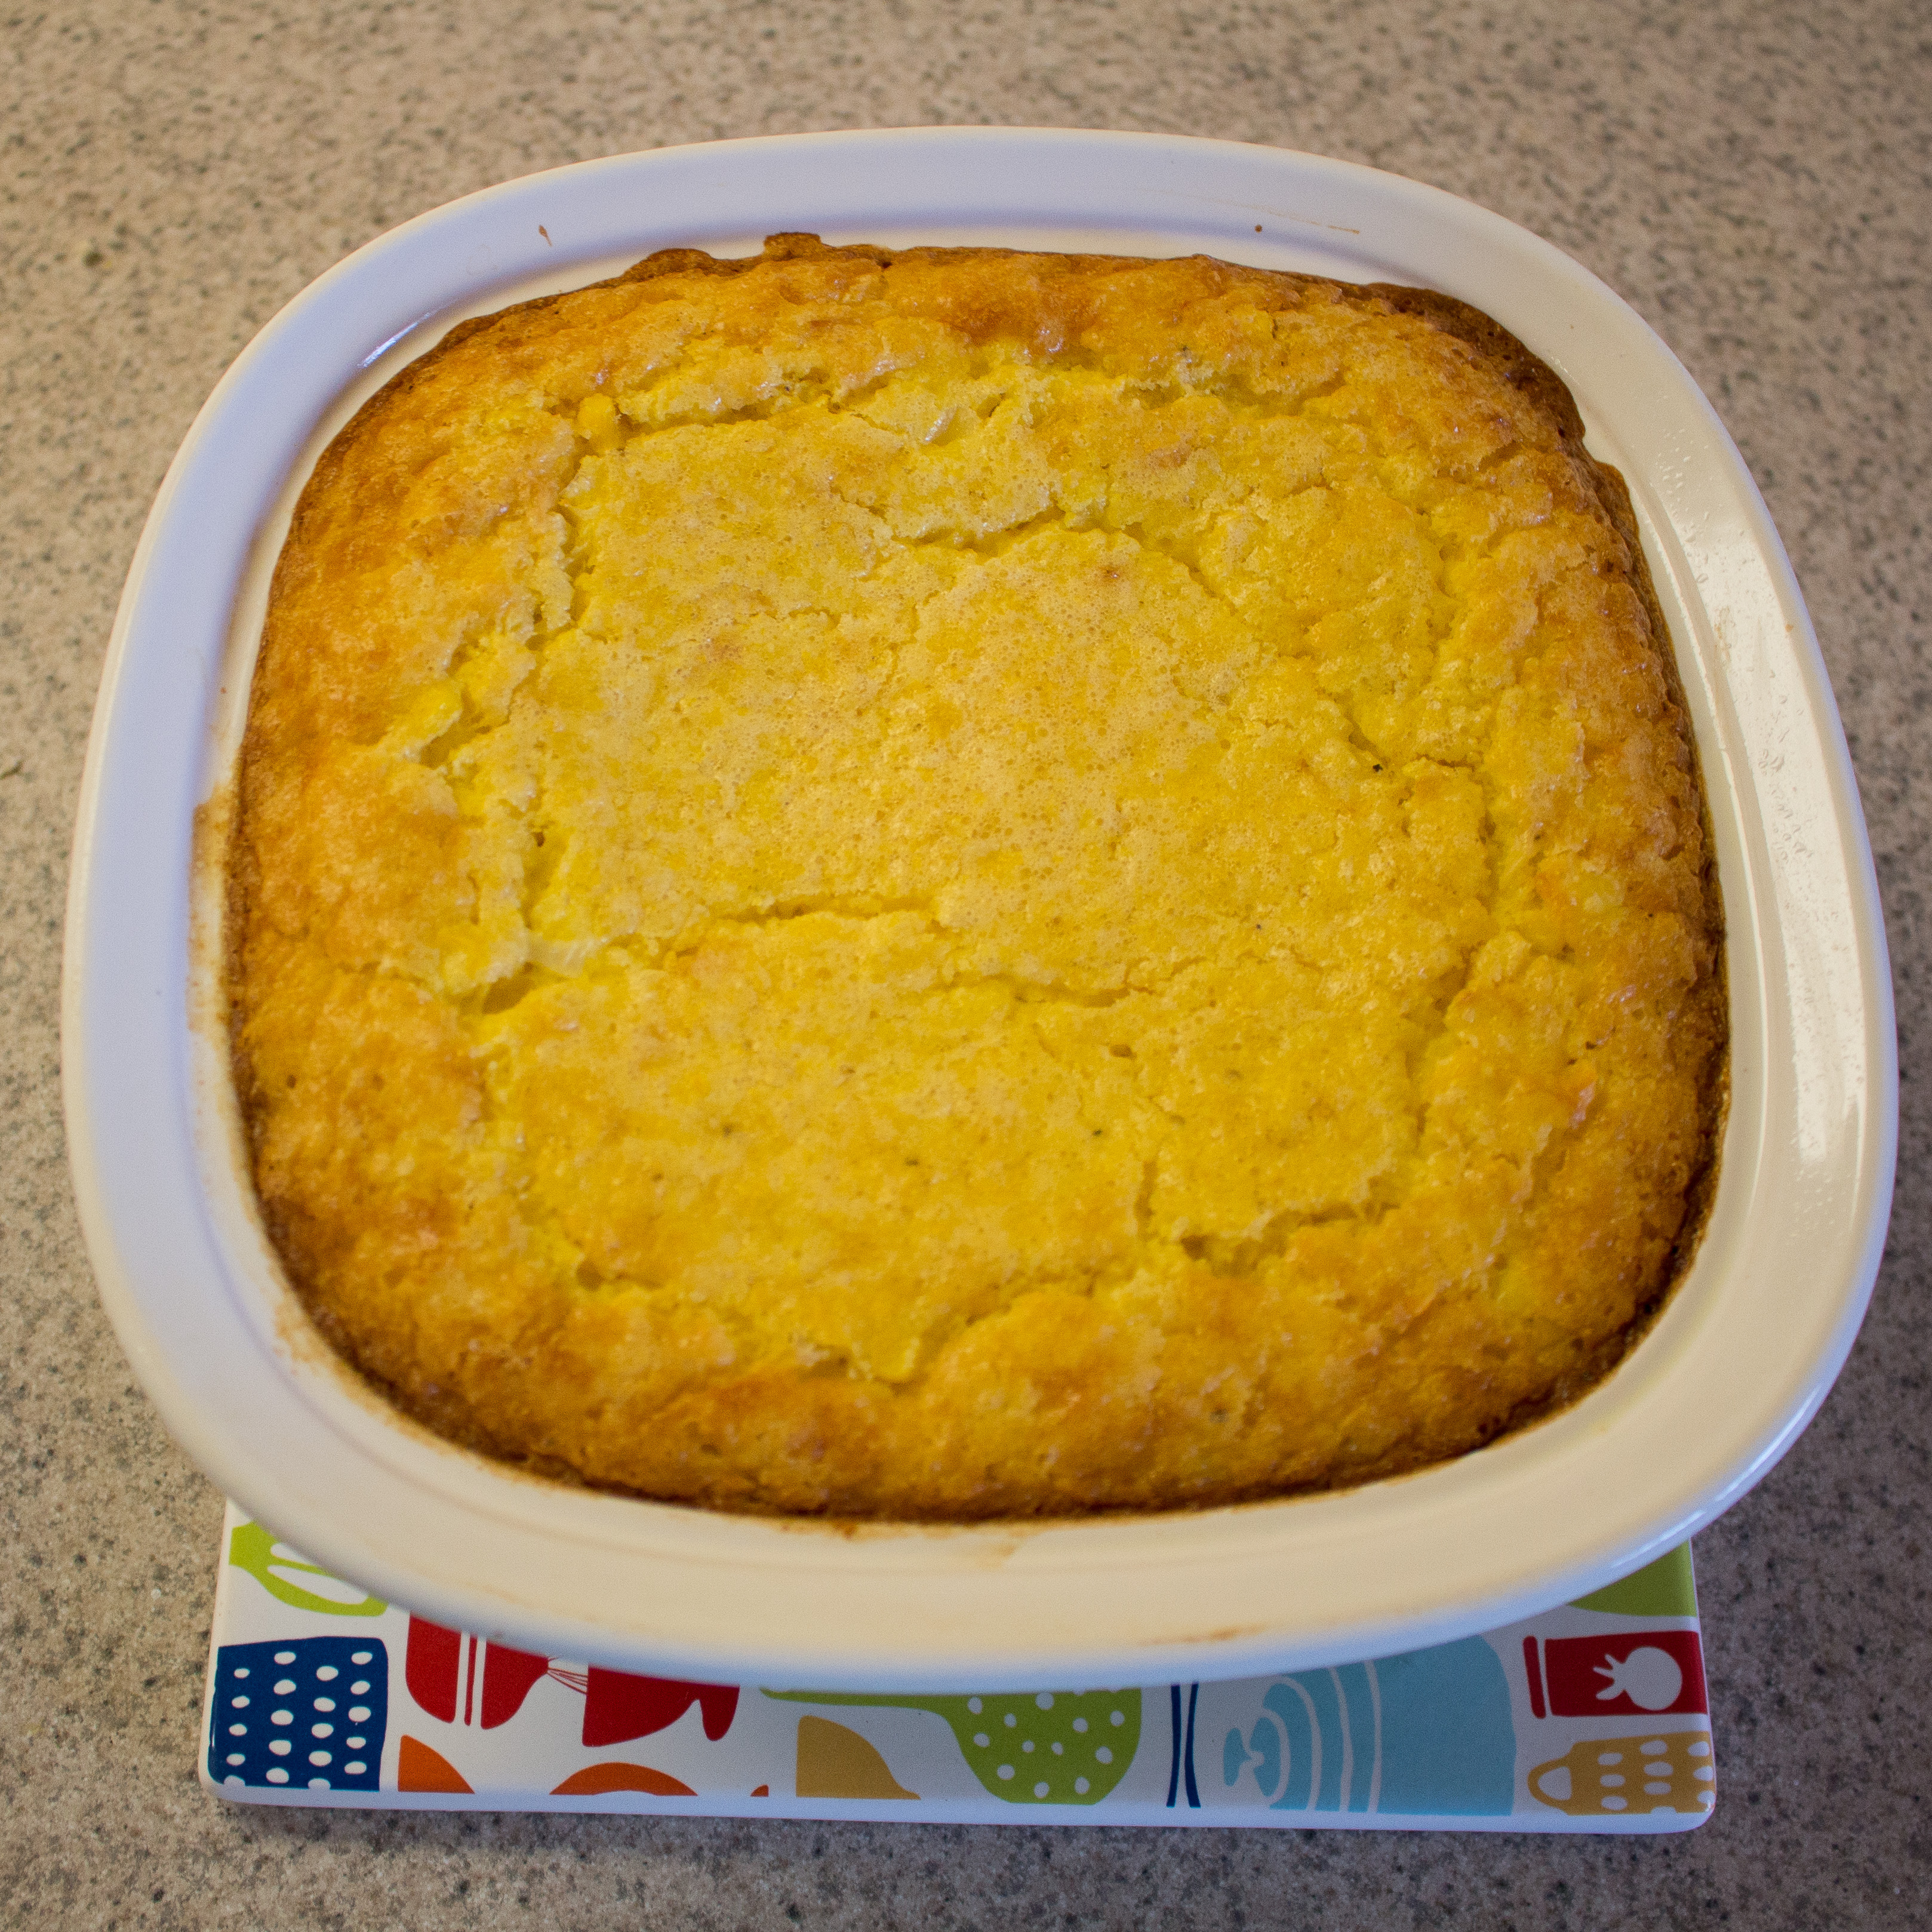 Corn pudding is a southern delicacy! It's full of corn flavor and a rich, almost custard-like texture.  | Teaspoon of Nose 